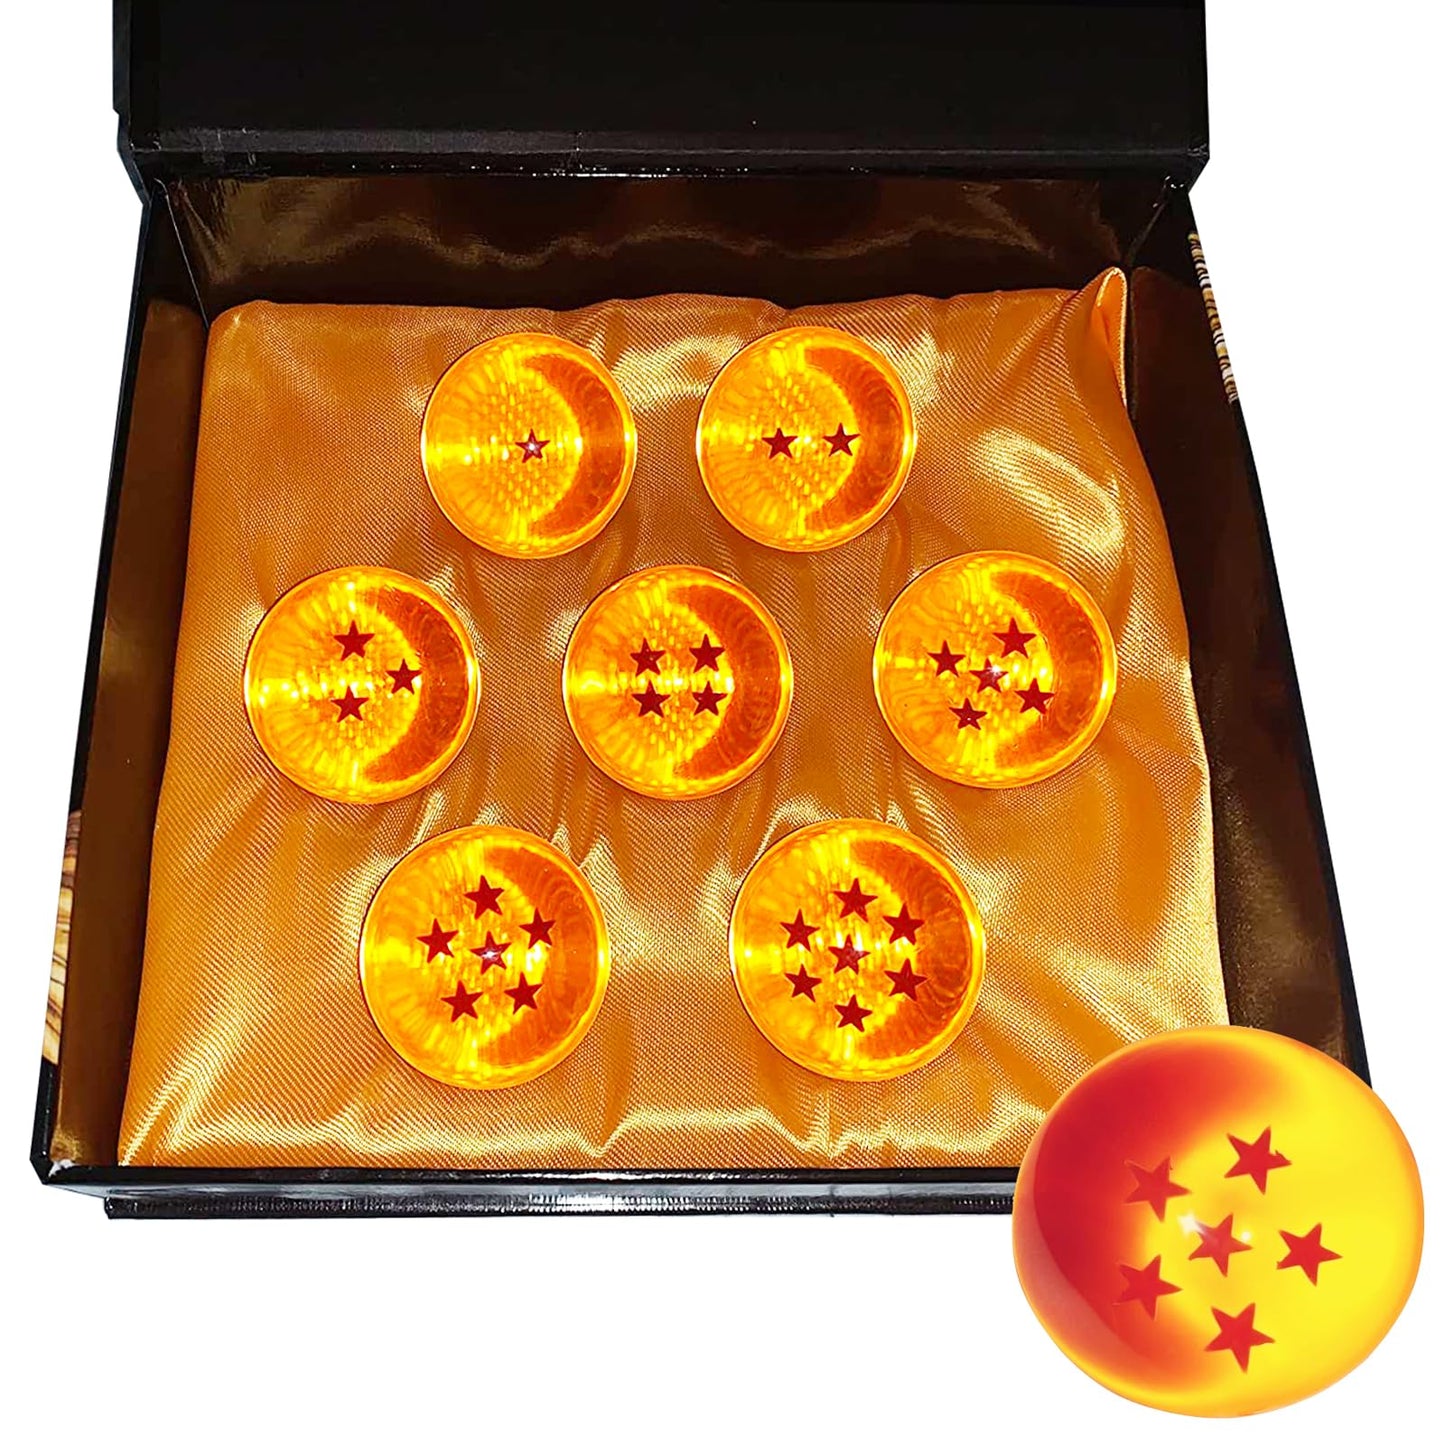 KAZETEC New Collectible Medium Crystal Resin Stars Balls Dragon Ball - Anime Collectibles New Gift Box Set of 7pcs(1.7 in in diameter/43 MM in Diameter) - amzGamess